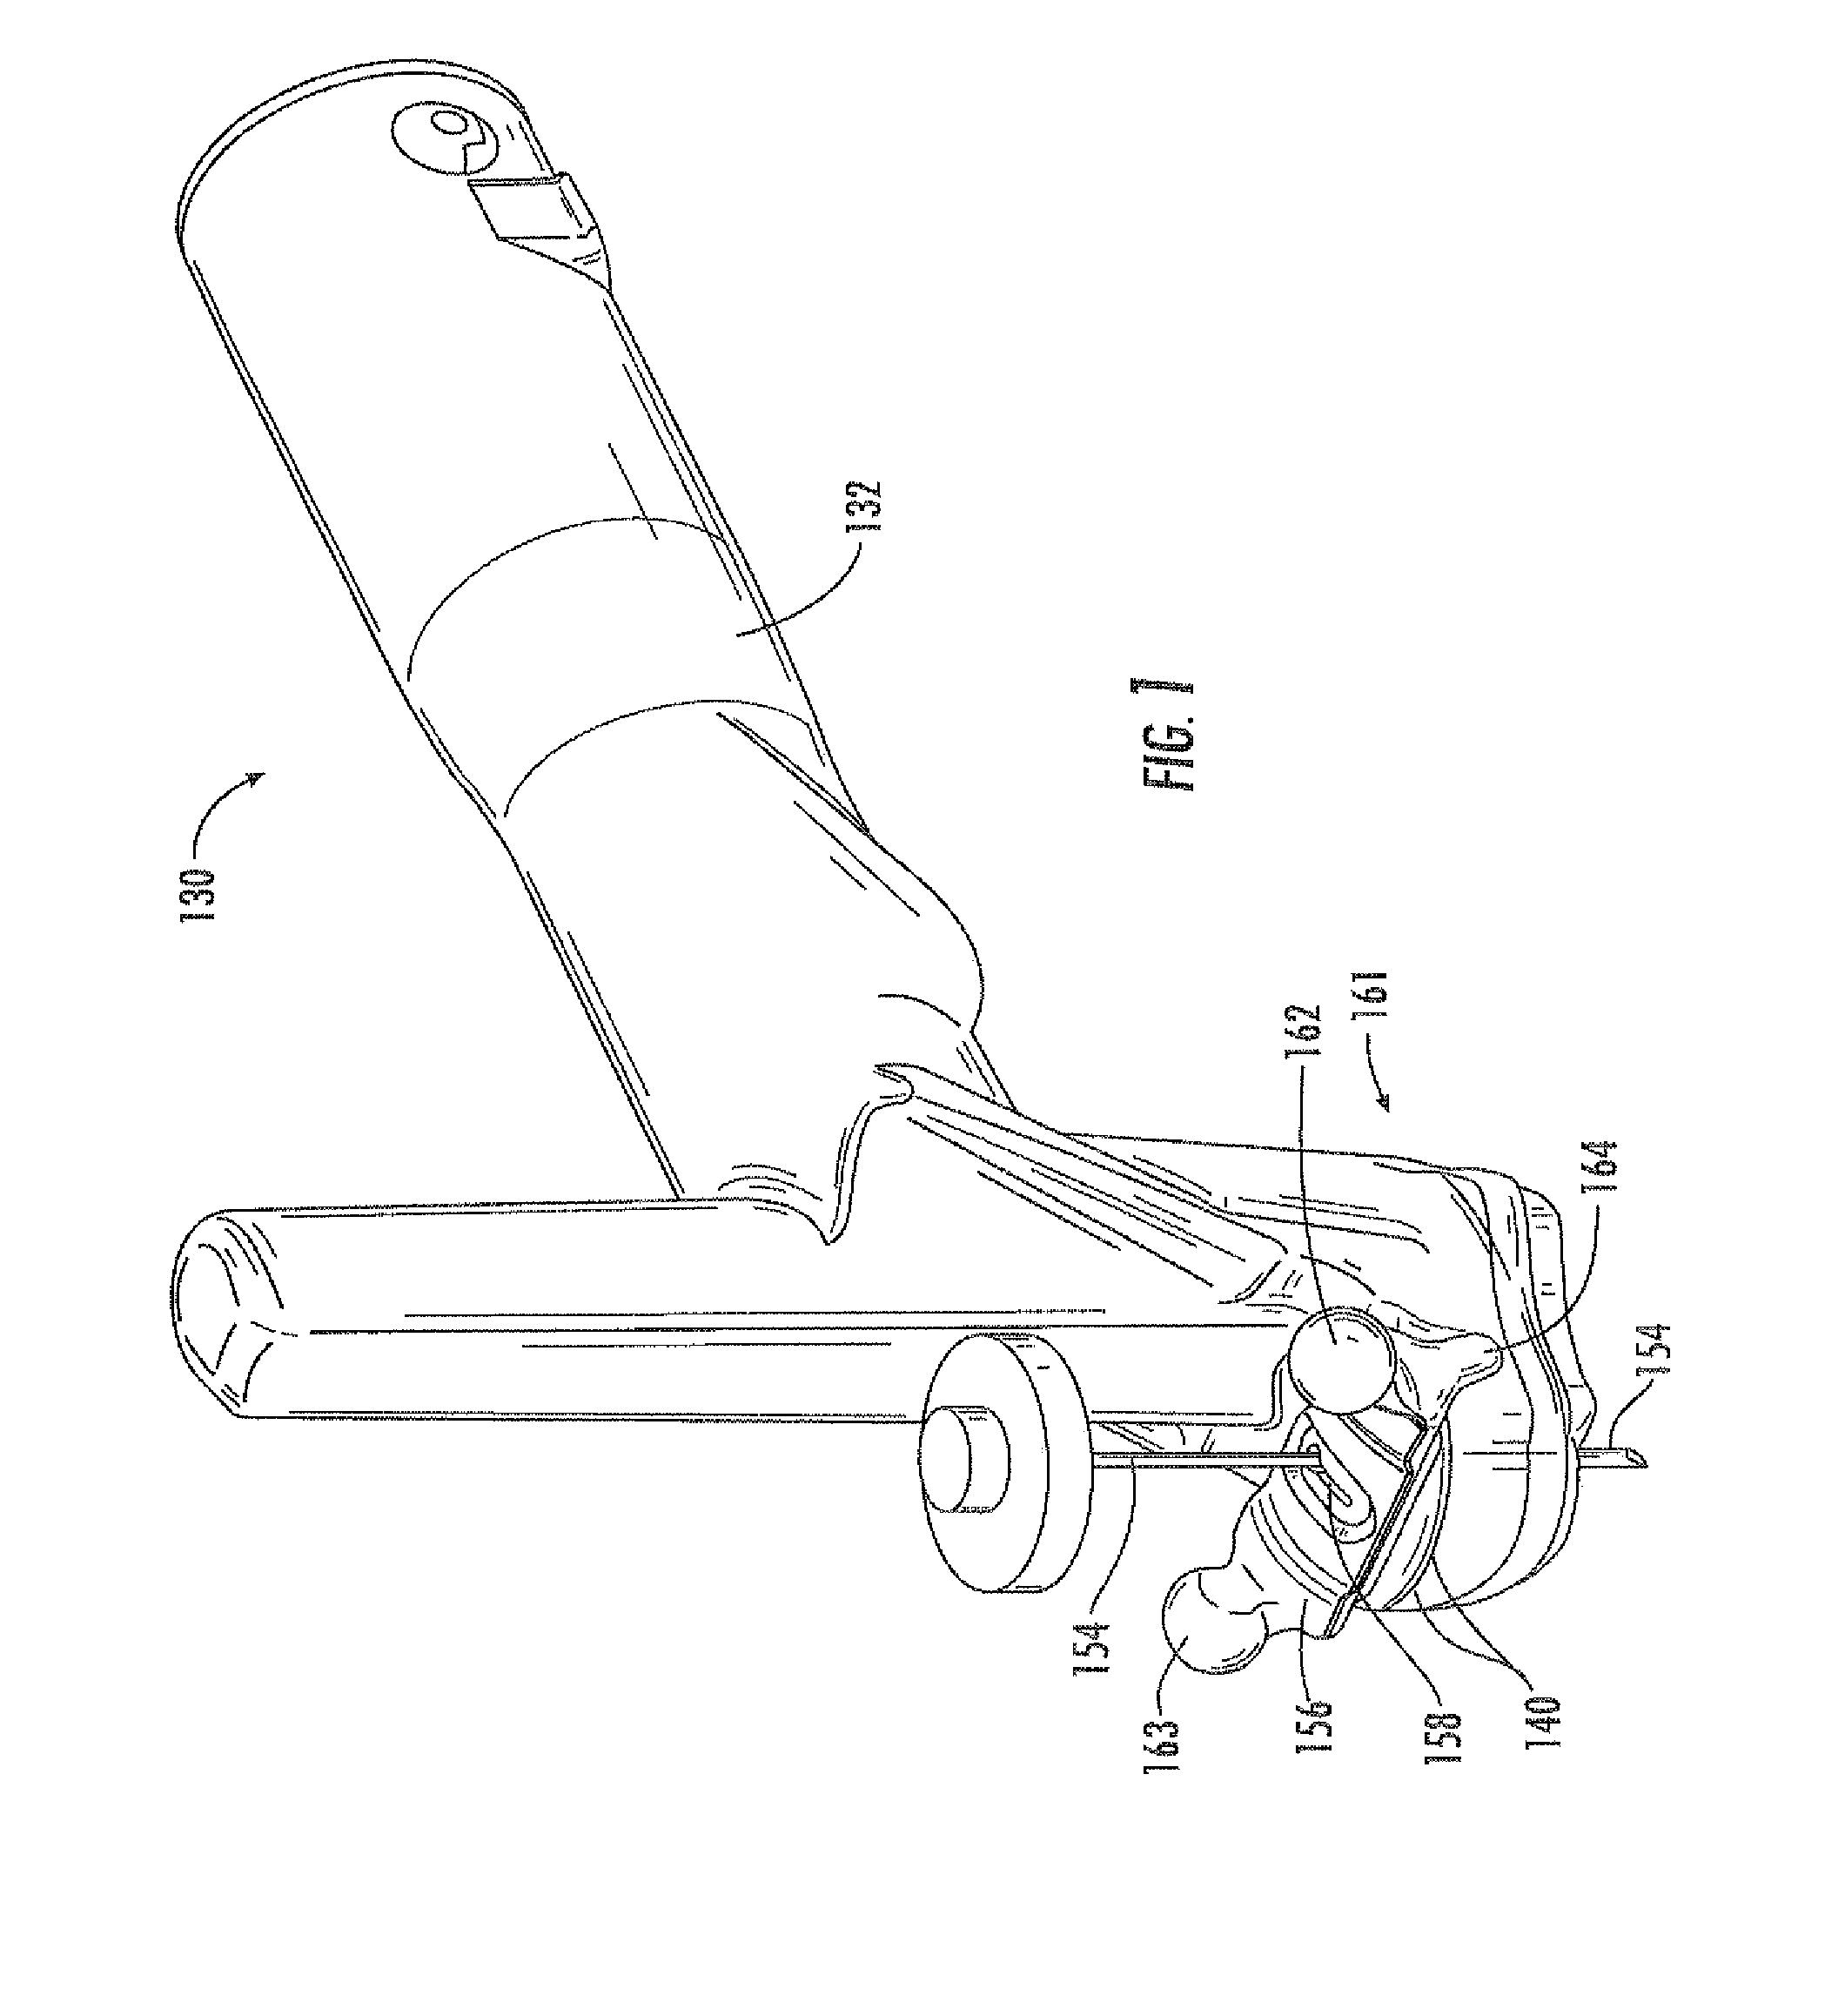 Clamp for a medical probe device